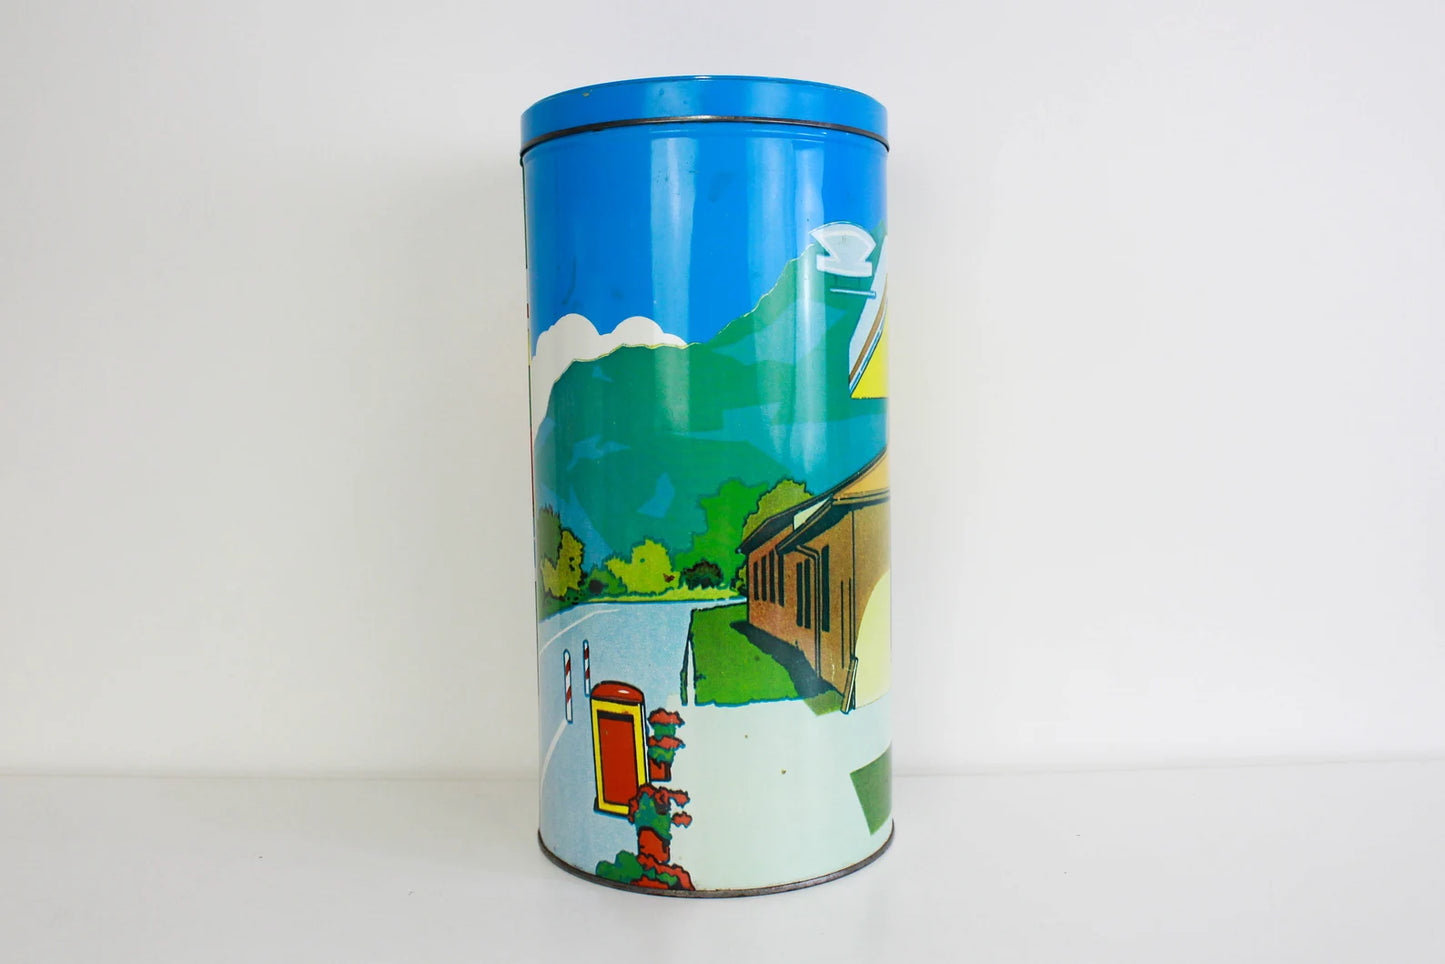 1980s Fiorucci Tin Can, Italian Gas Station Illustration, Large Fiorucci Canister, Collectible Vintage Fiorucci Homewares